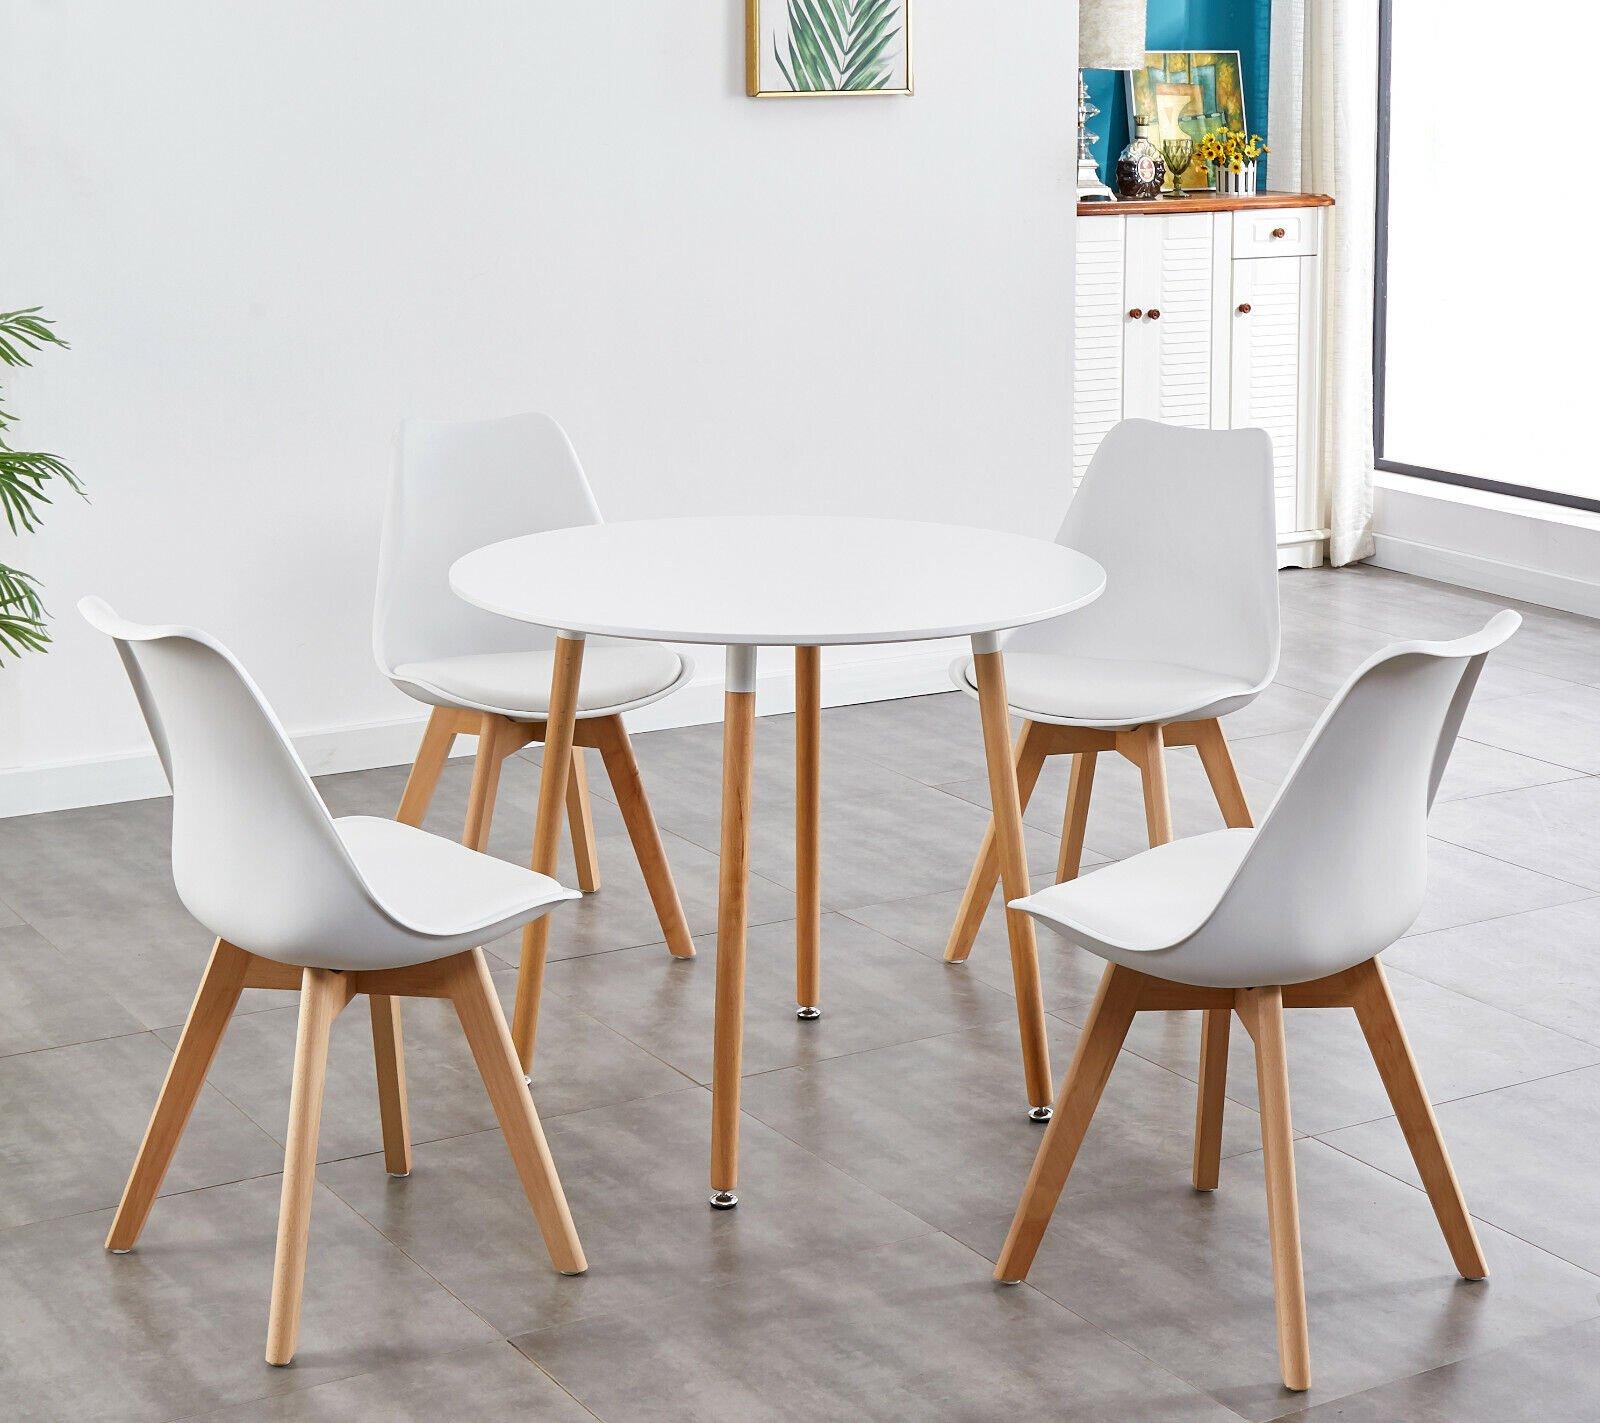 Round Kitchen Dining Table Set And 4 Tulip Chairs, Wood Circular Table